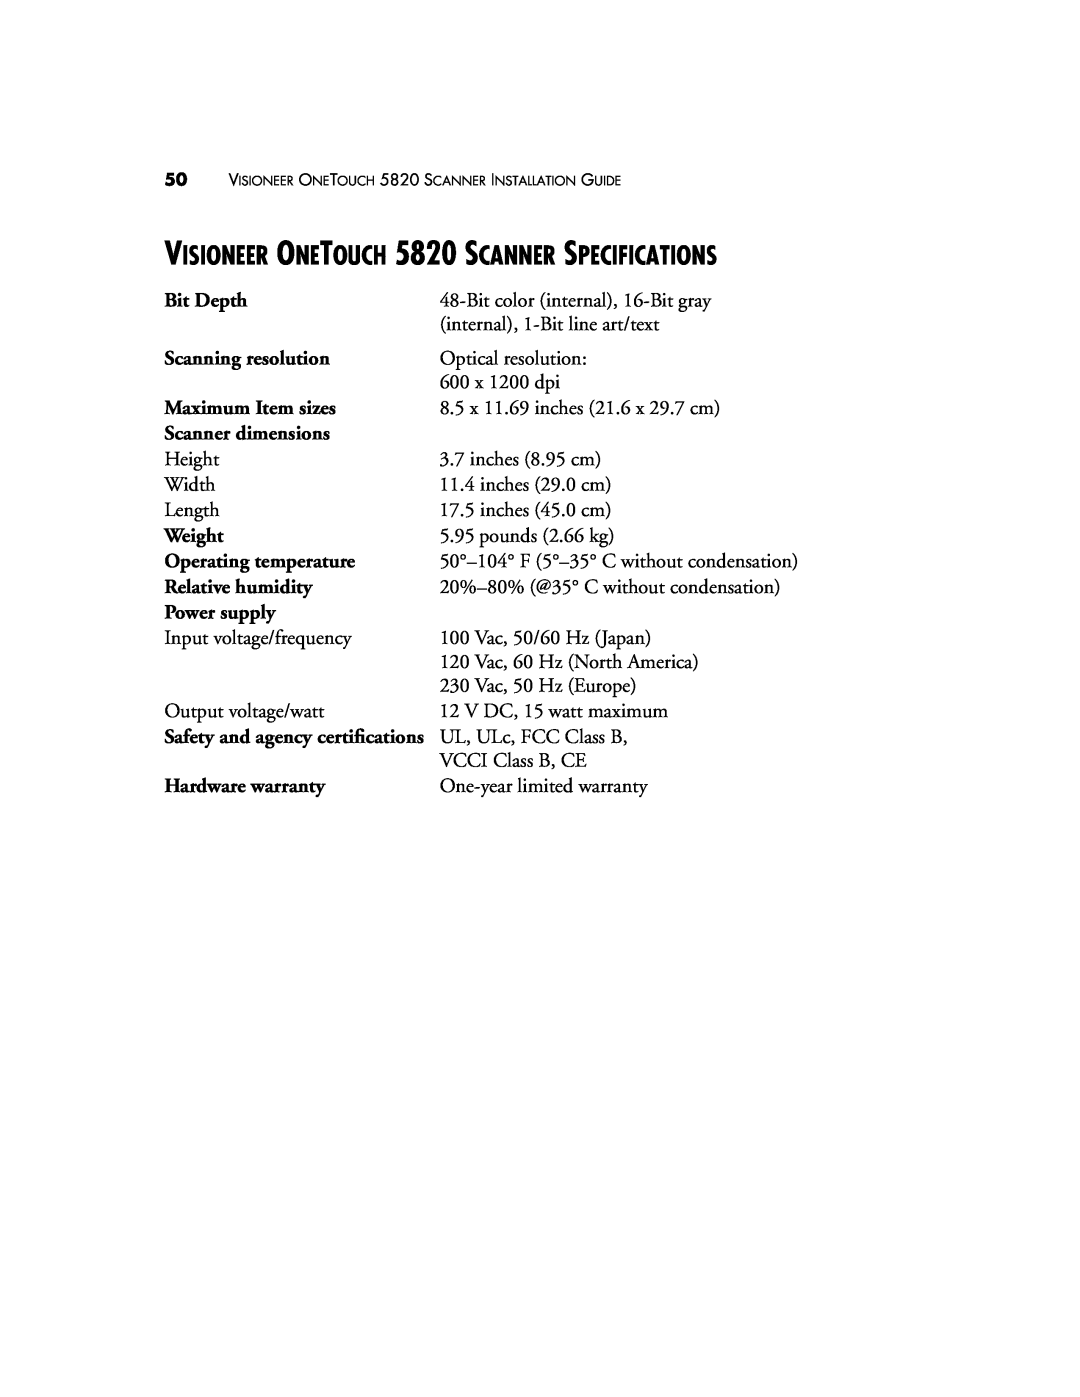 Visioneer manual VISIONEER ONETOUCH 5820 SCANNER SPECIFICATIONS 